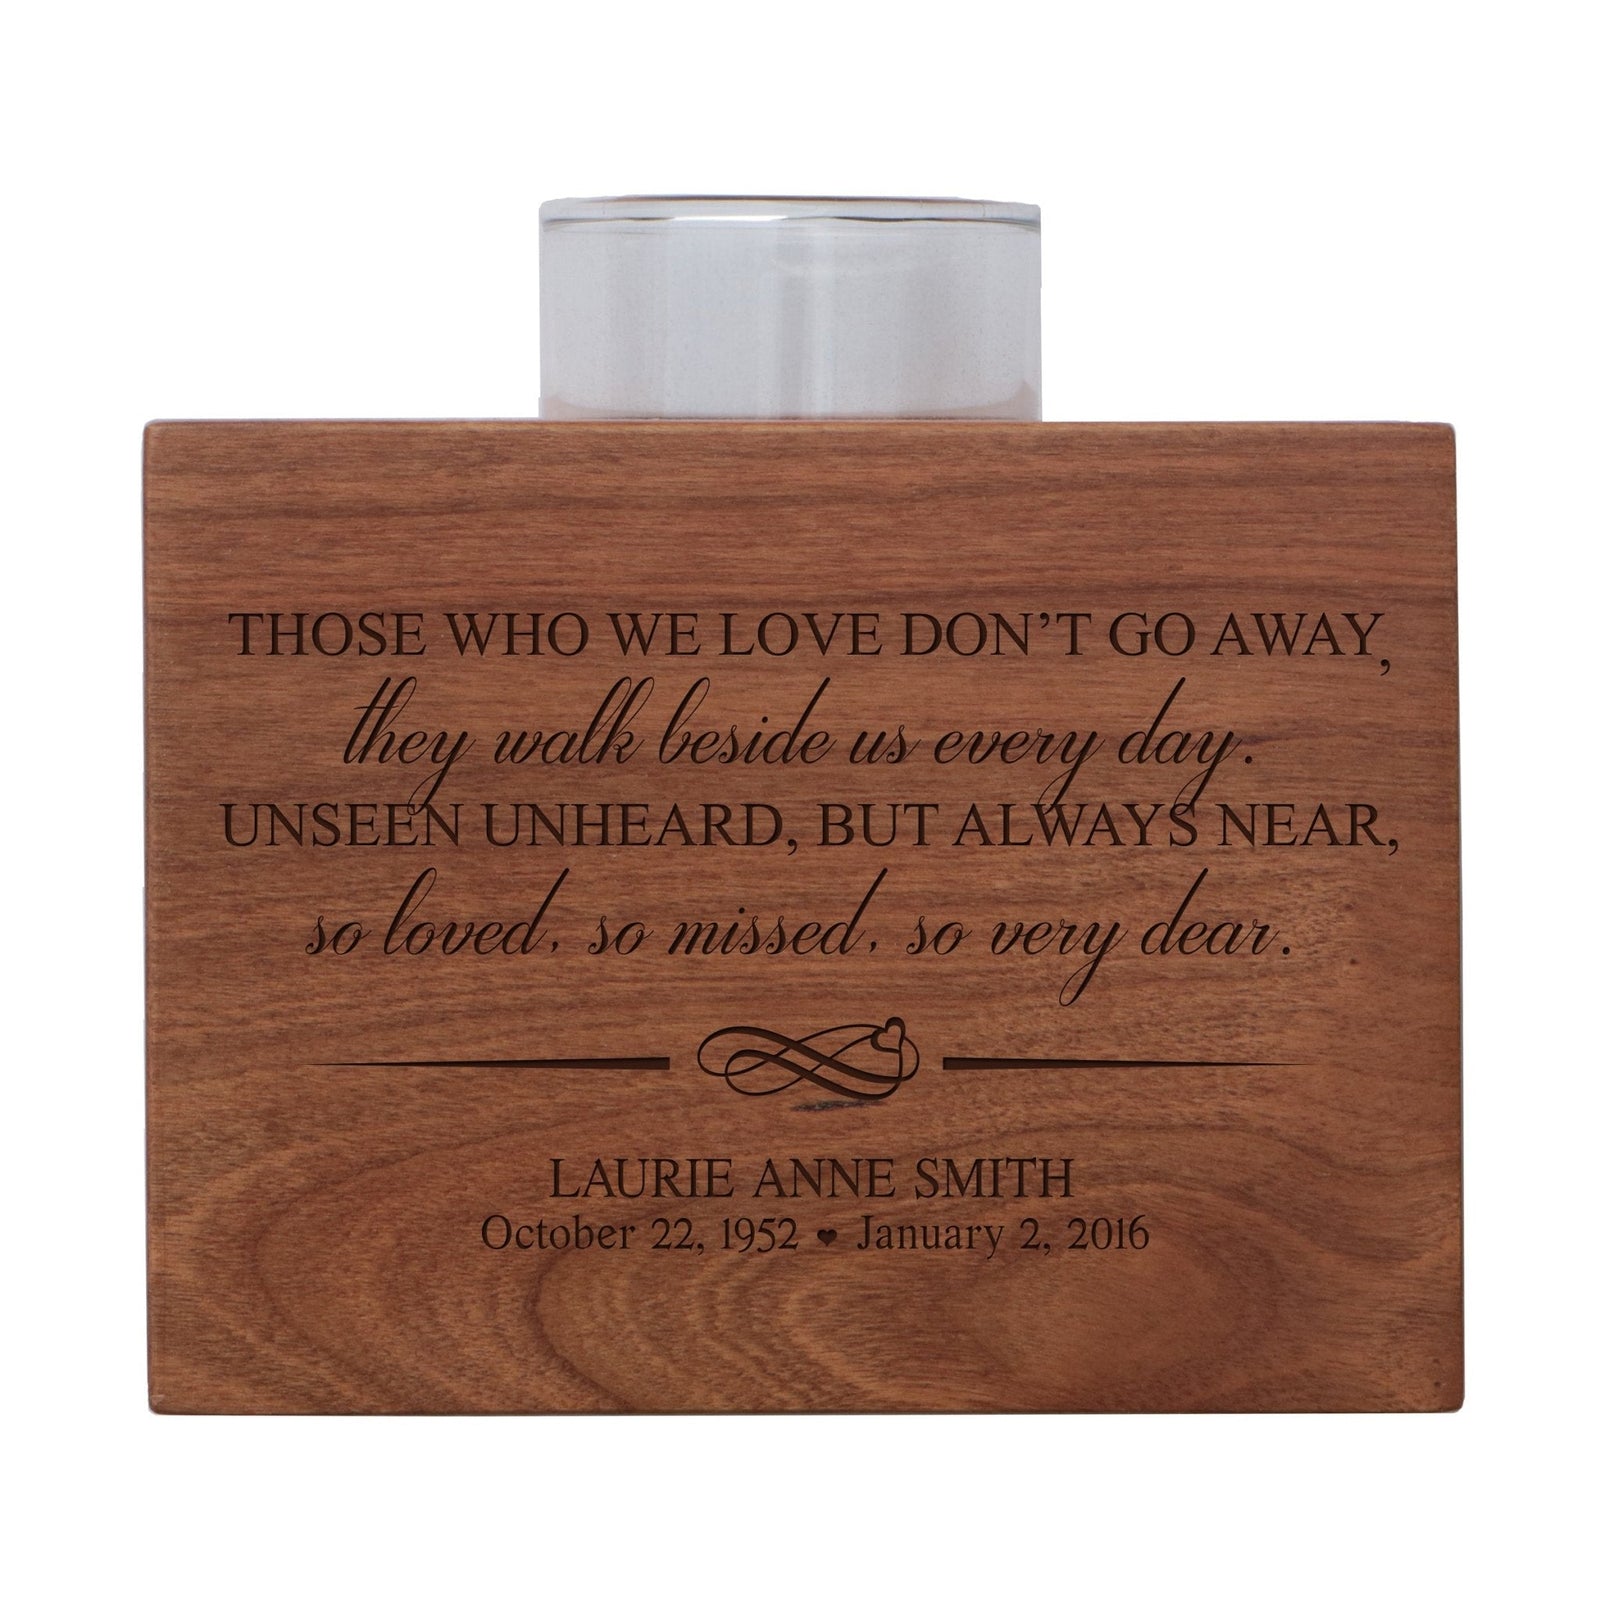 Personalized Memorial Candle Holder - Those Who We Love - LifeSong Milestones